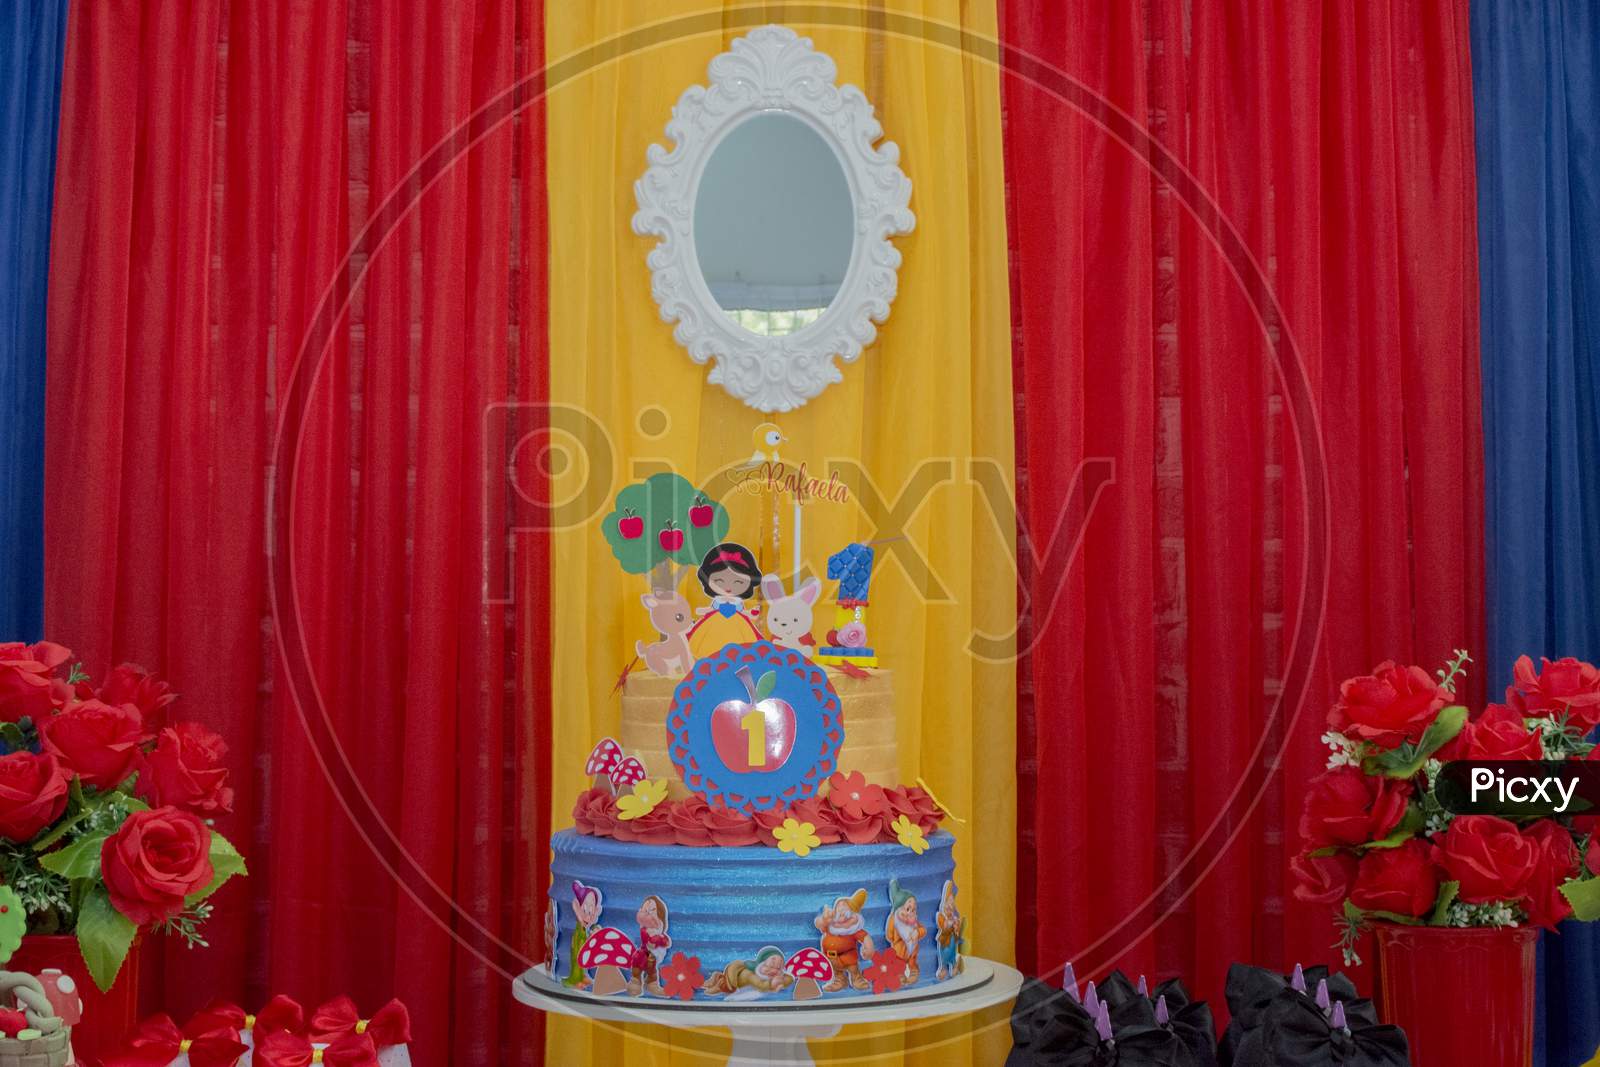 Colorful Birthday Party Decoration, Theme Of Snow White And The Seven Dwarfs